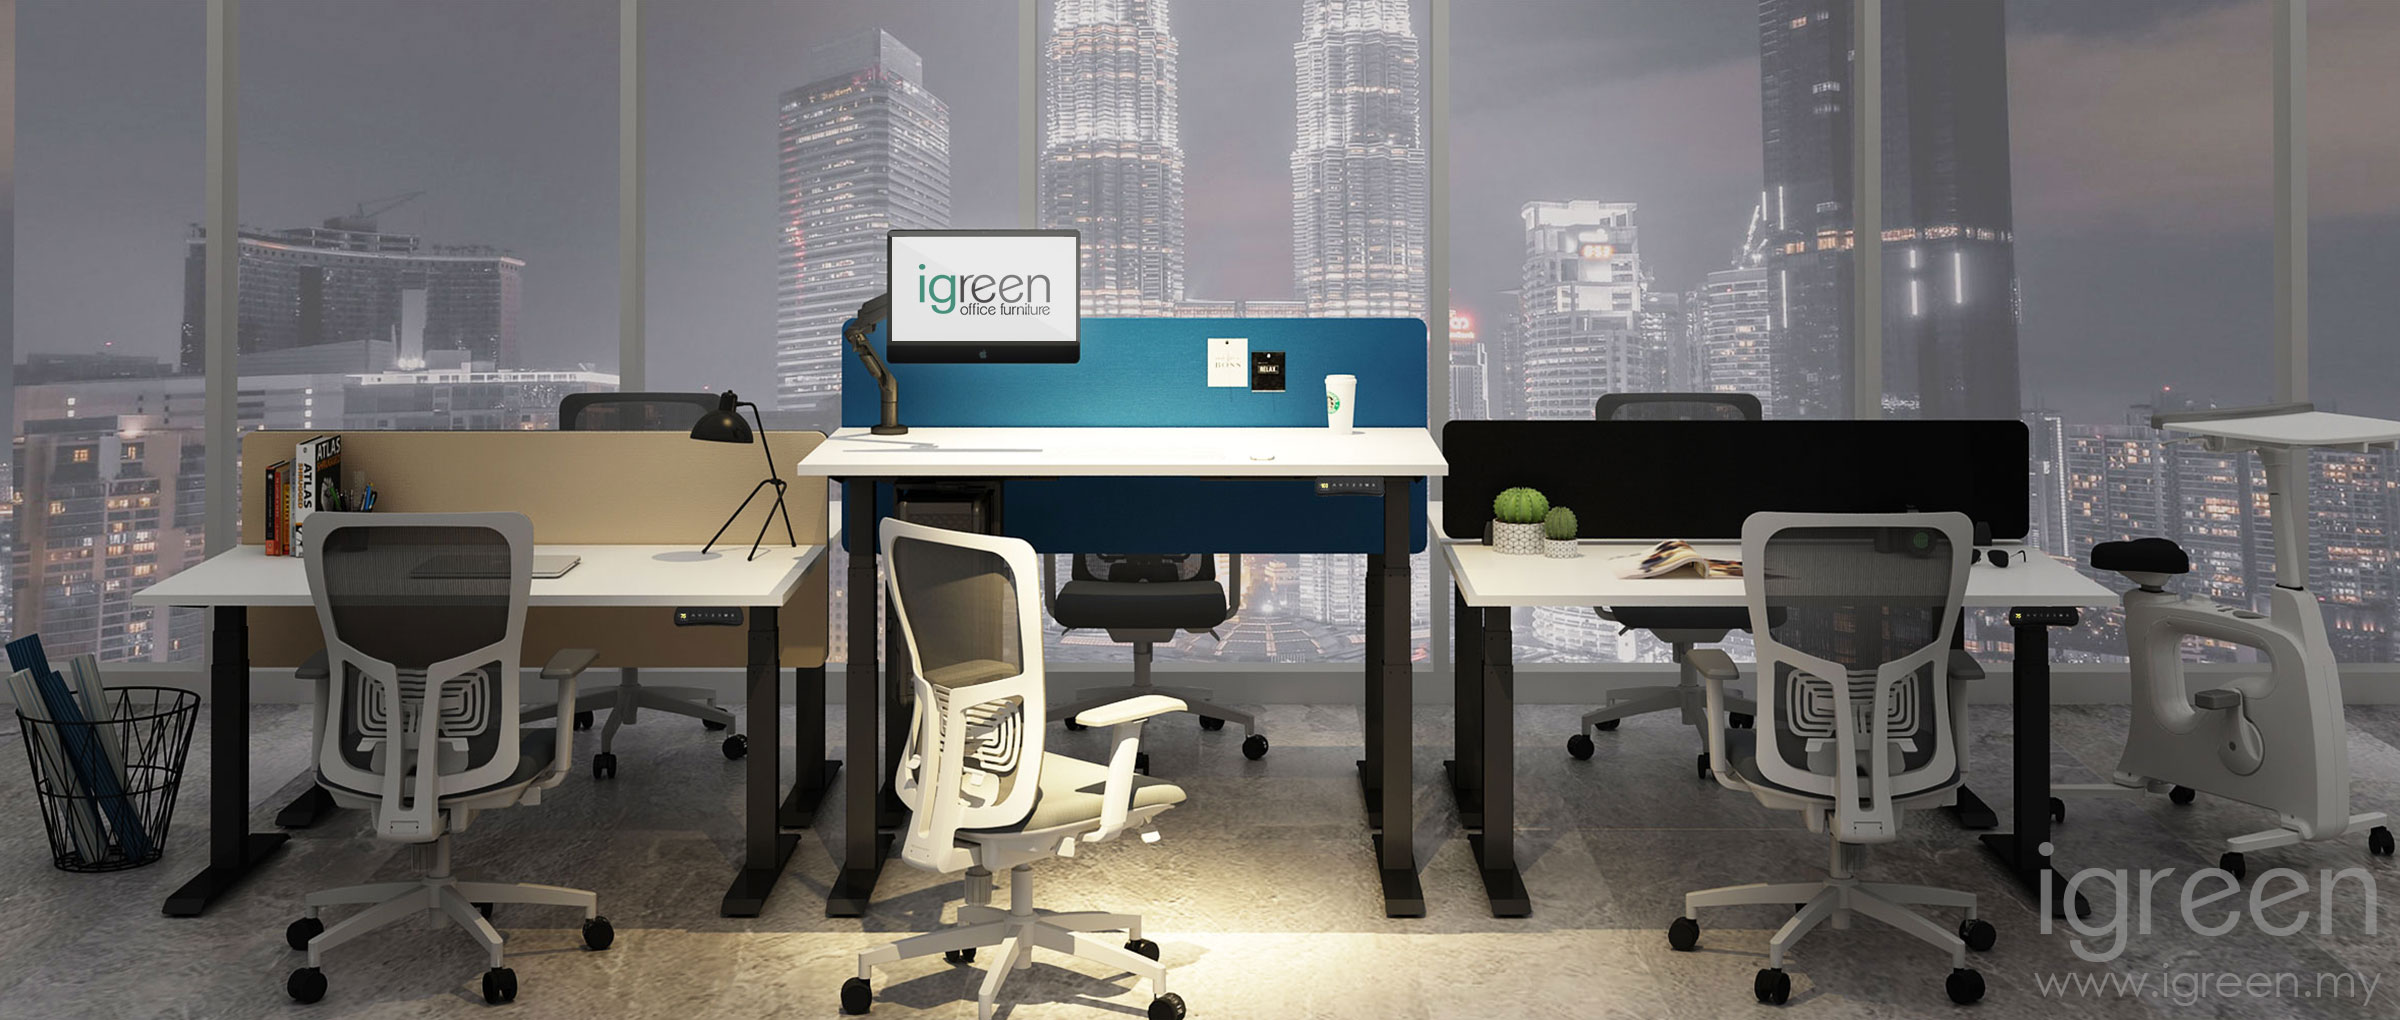 flexispot-malaysia-workstation-with-banner